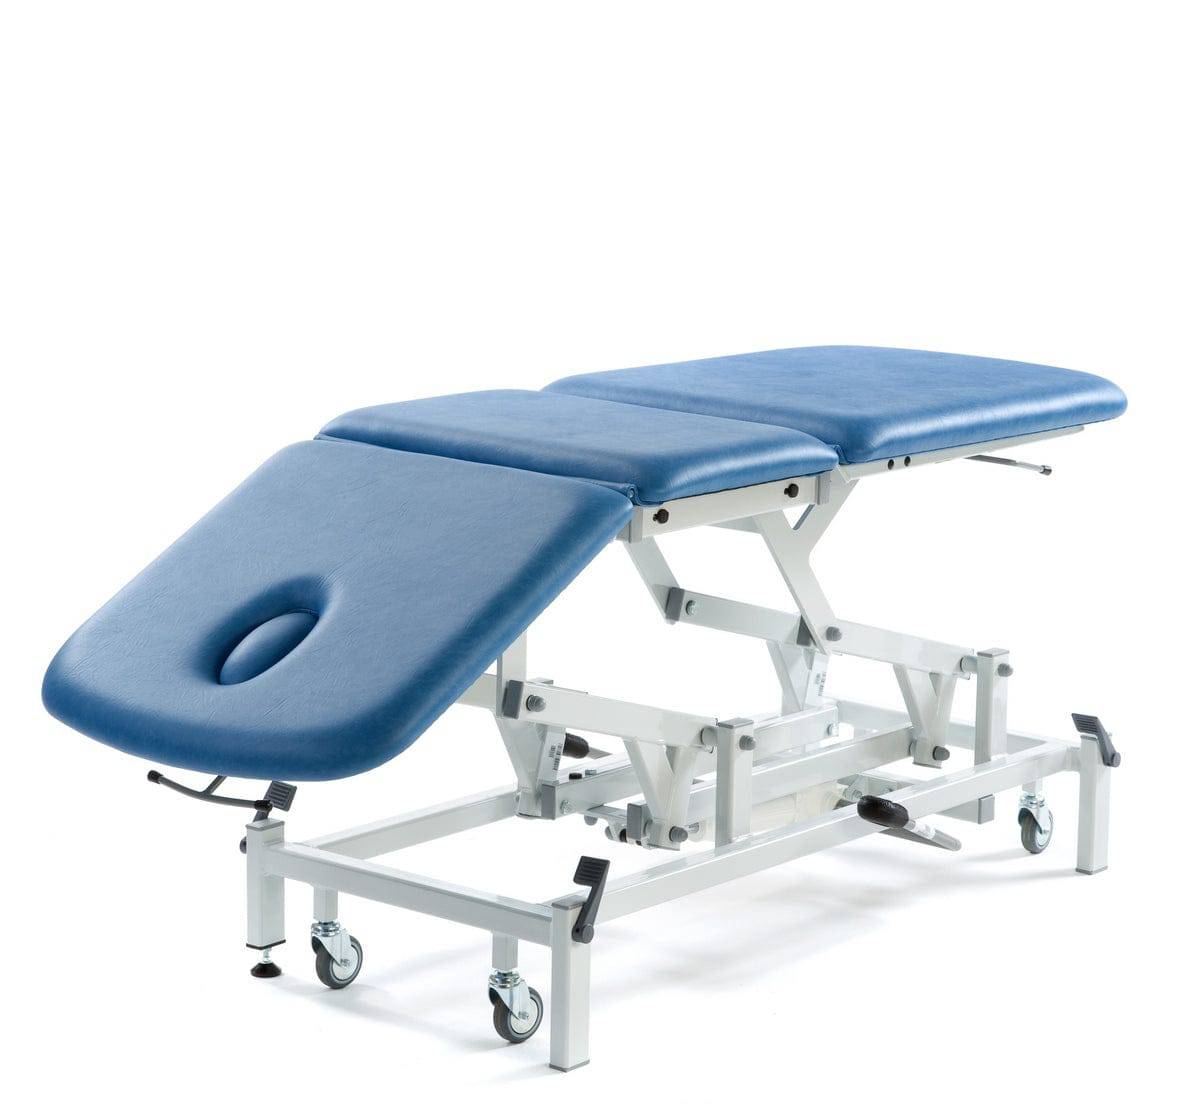 Seers 3 Section Hydraulic Examination Couch